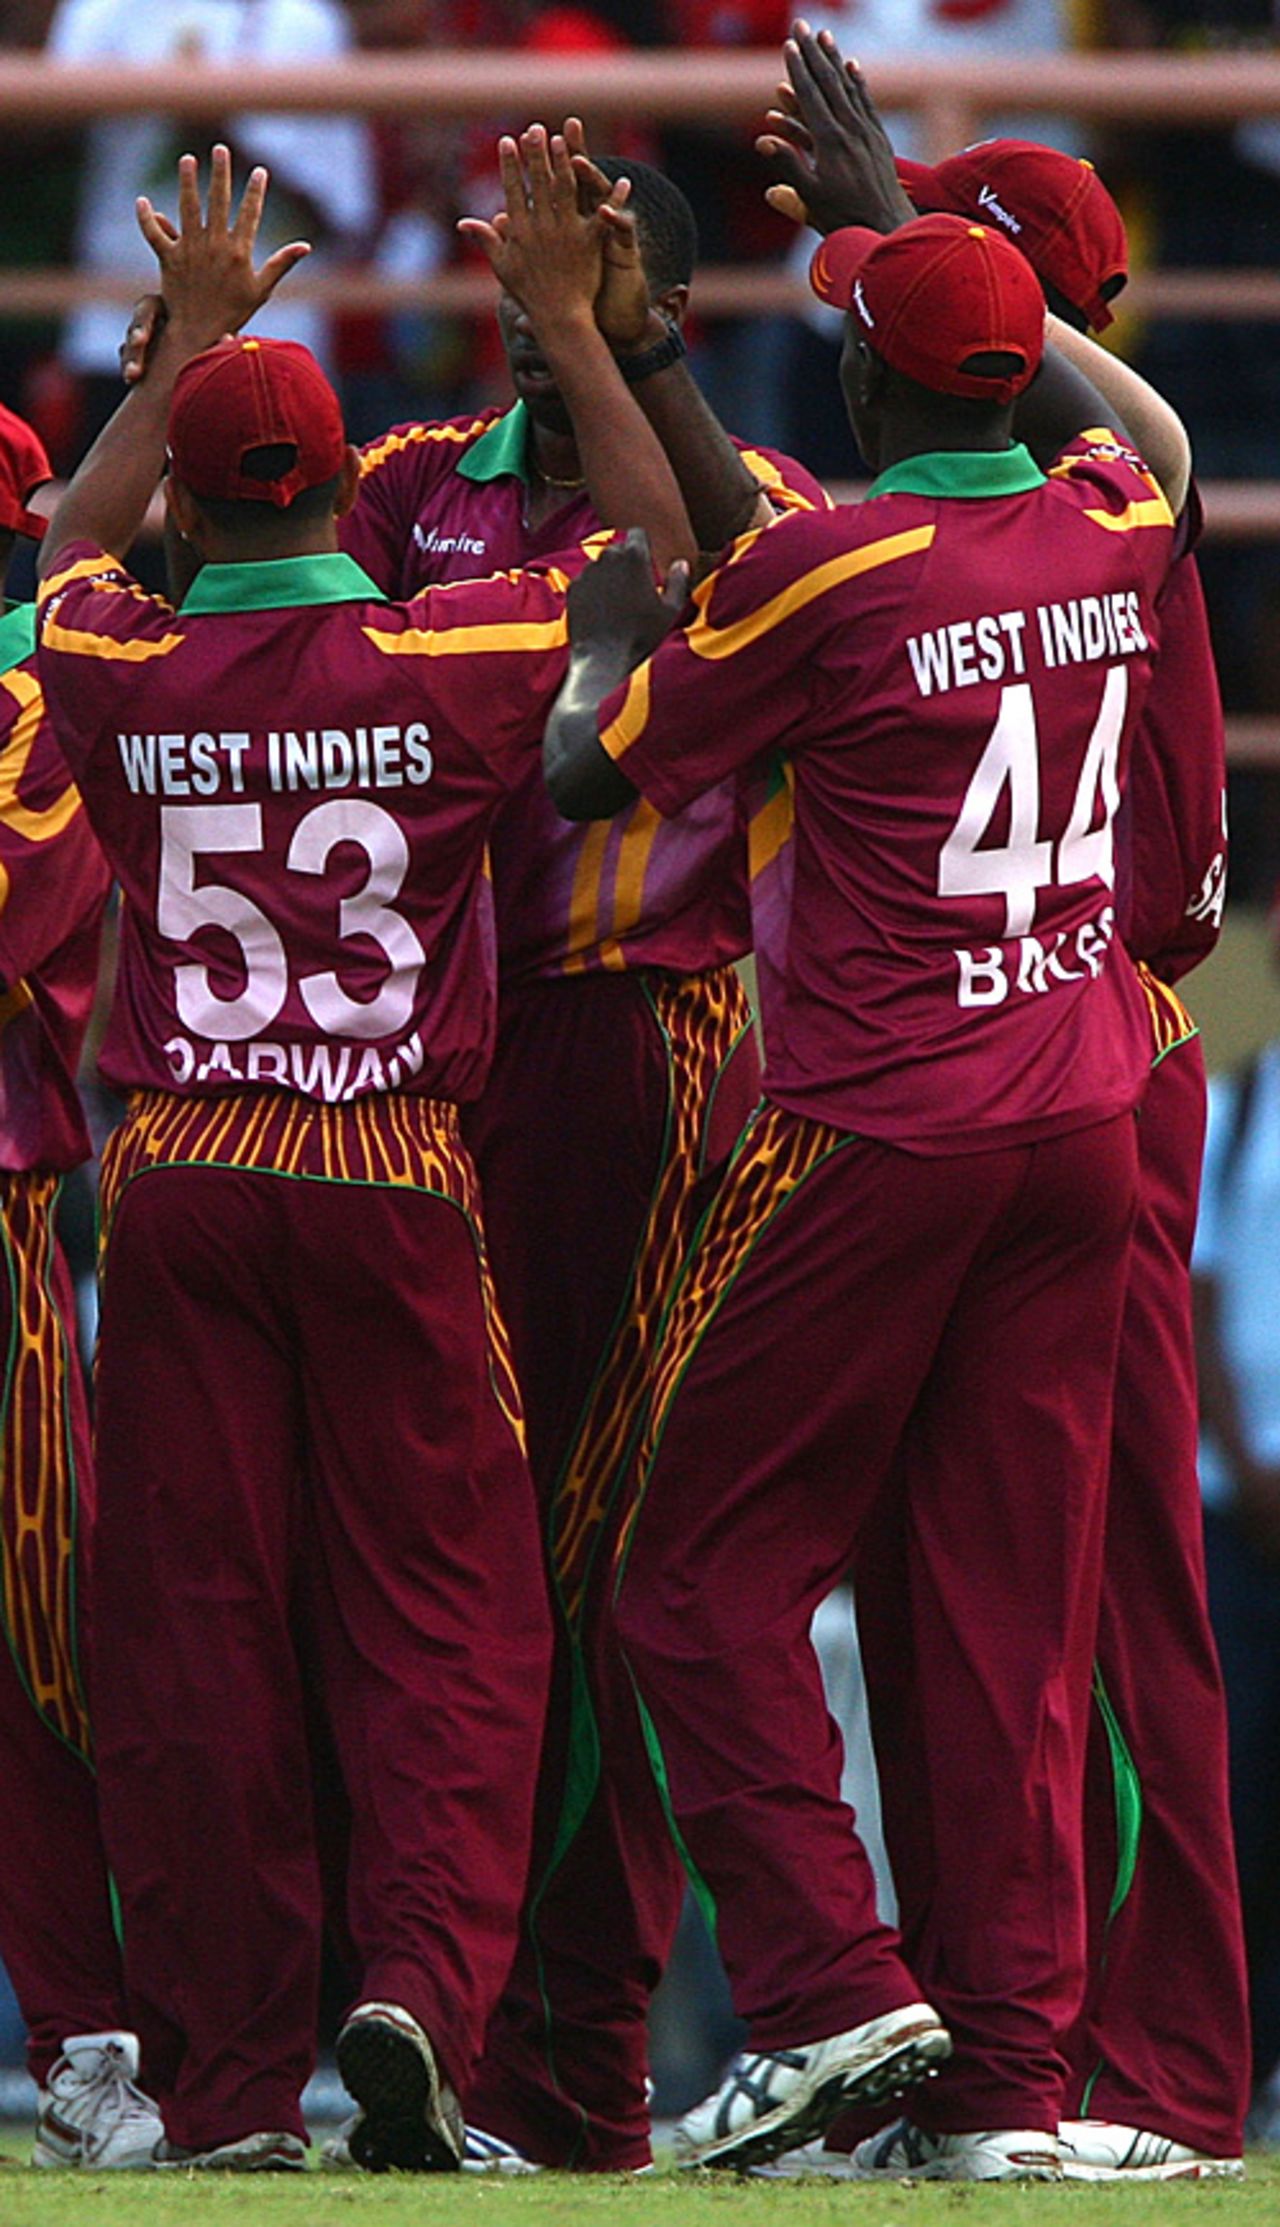 West Indies congratulate eachother on winning the second ODI against England, West Indies v England, 2nd ODI, Providence